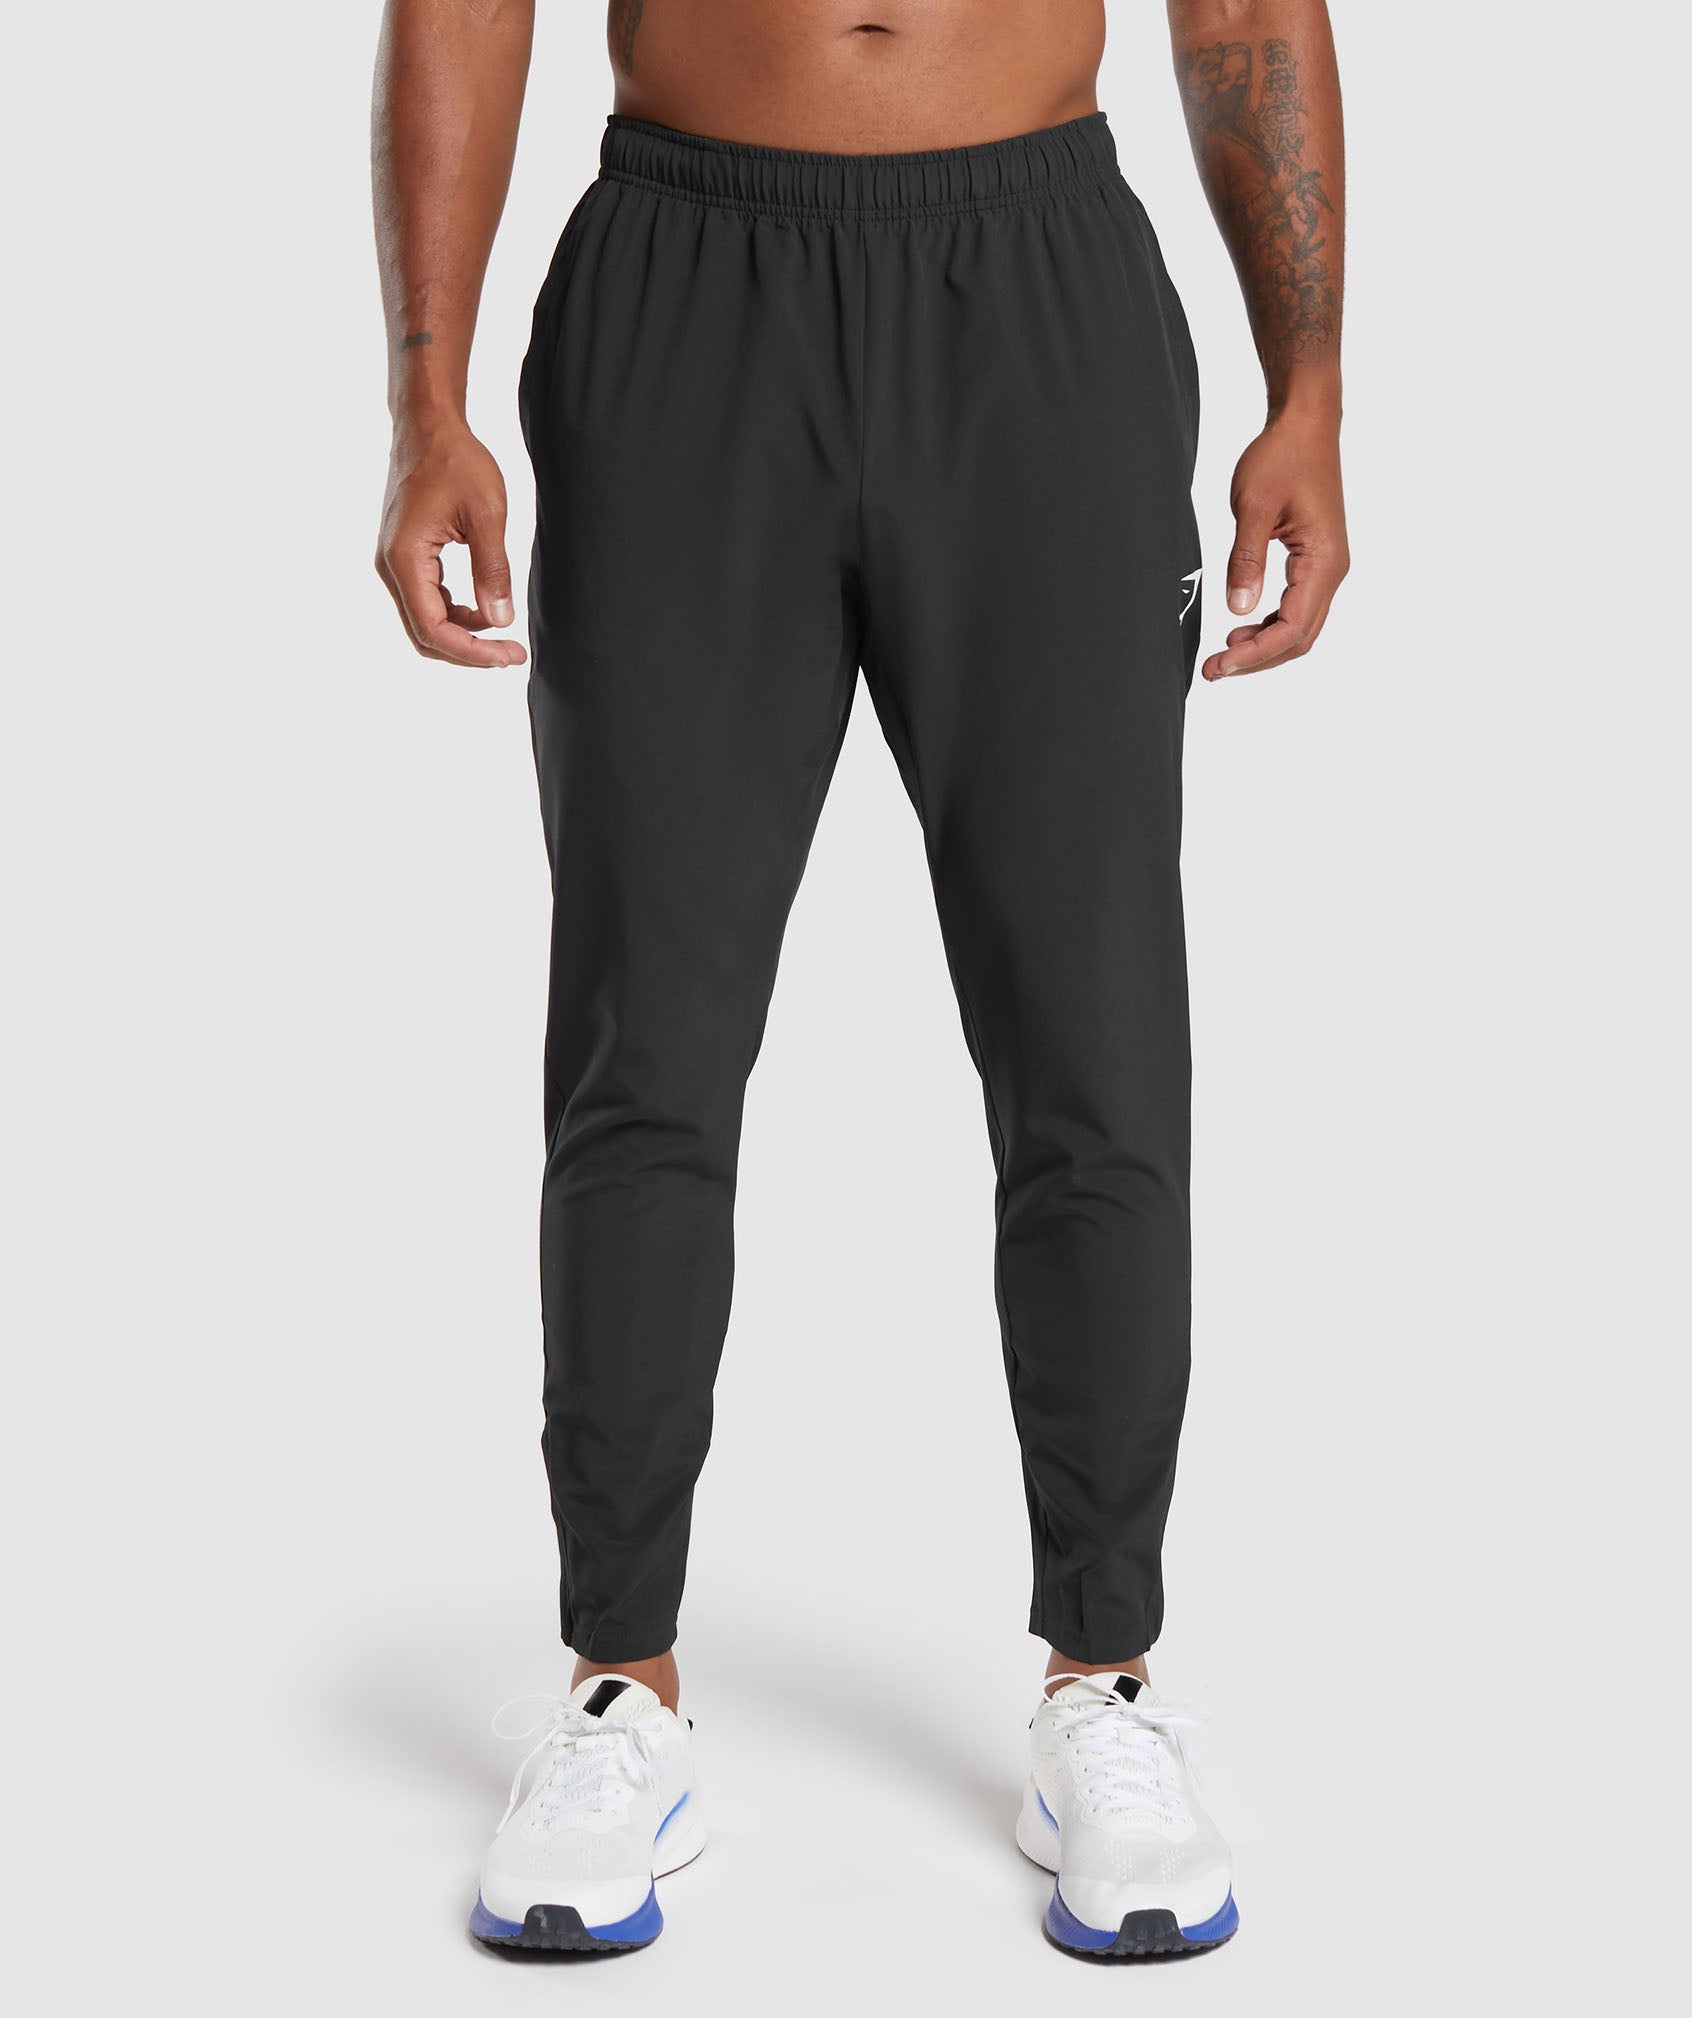 Arrival Woven Joggers in Black ist nicht auf Lager